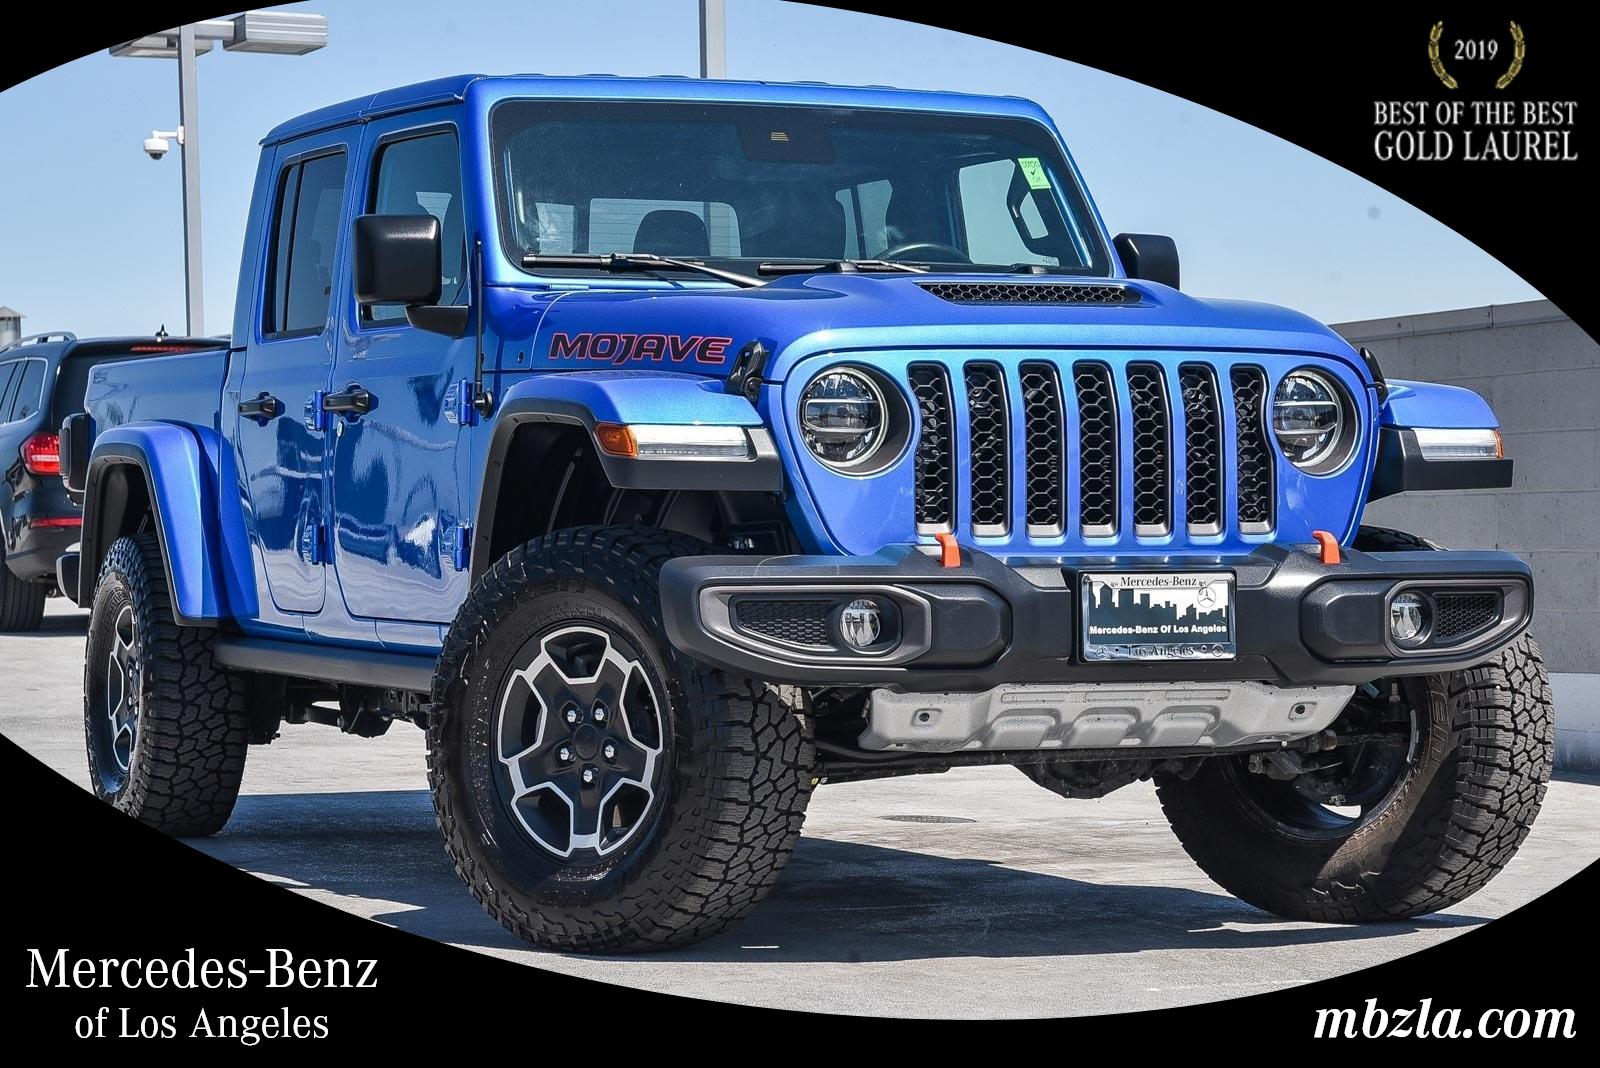 Used Jeep Truck Crew Cab Mojave Hydro Blue Pearlcoat For Sale At Lithia Motors Stock p